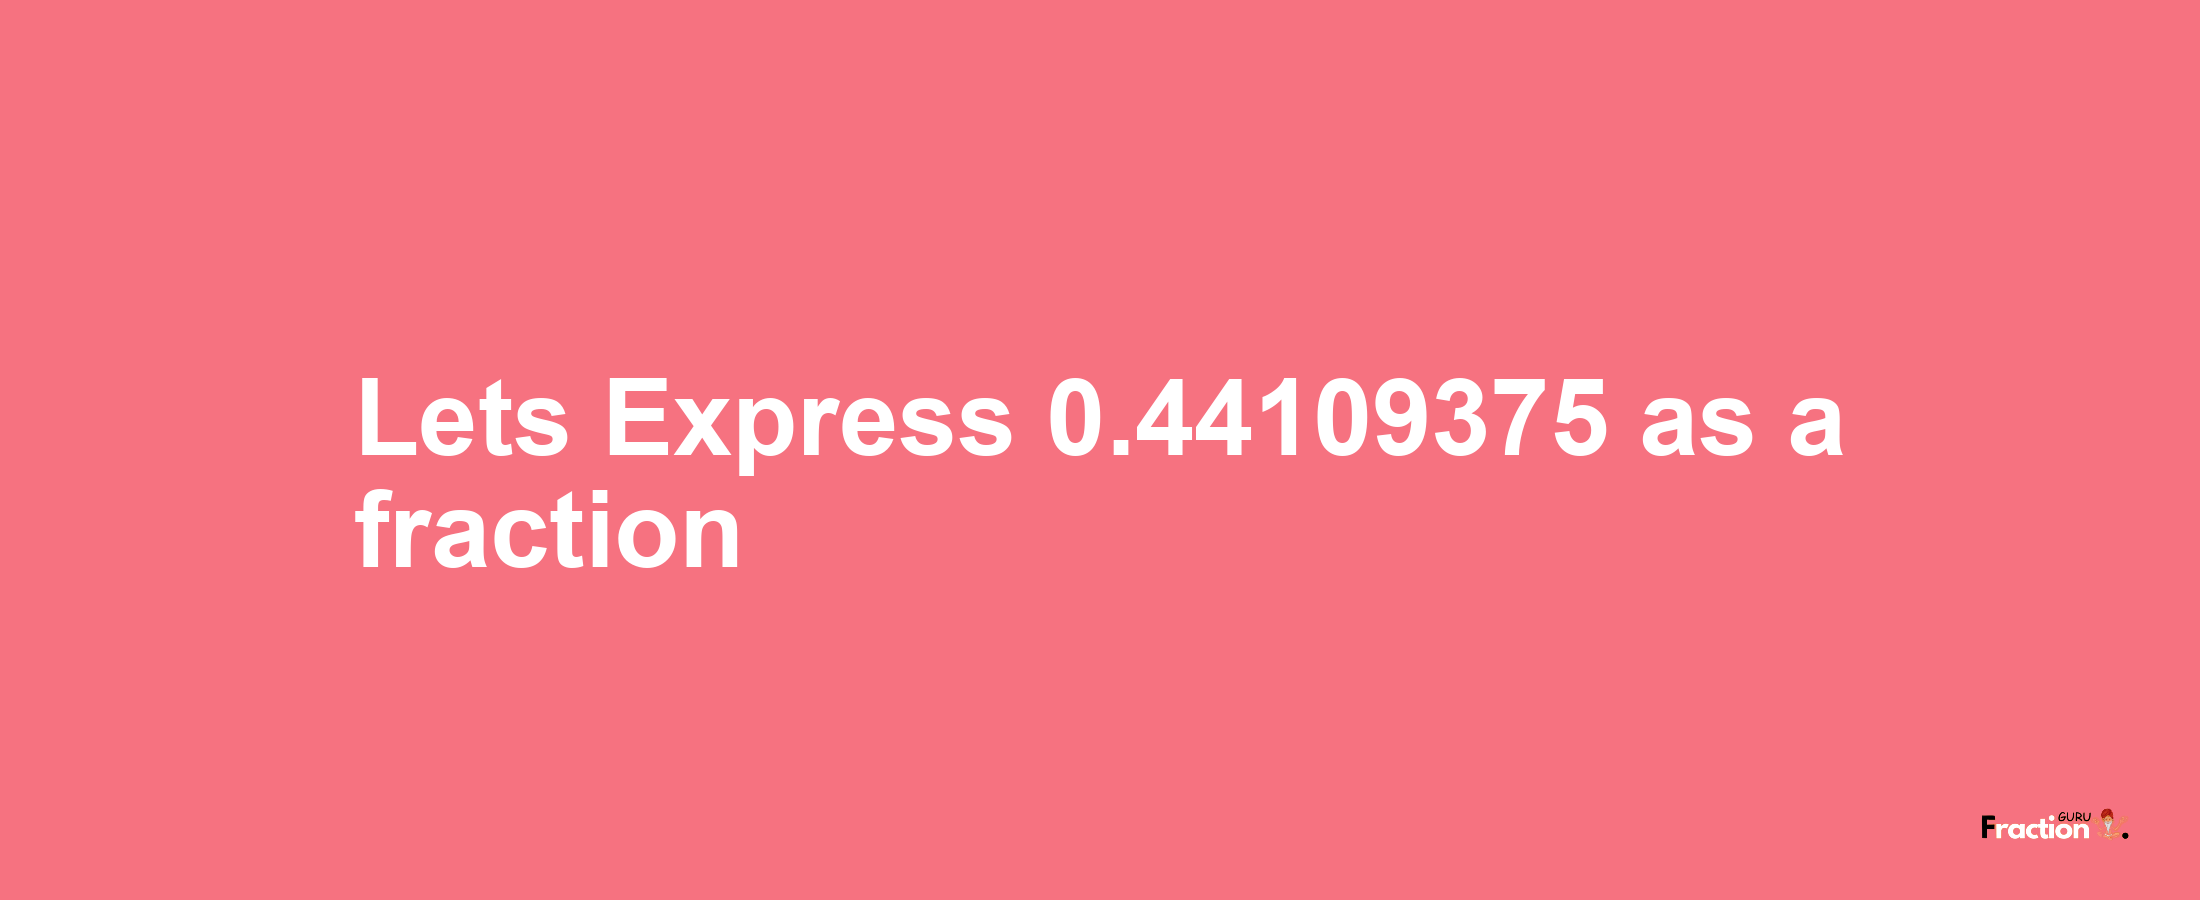 Lets Express 0.44109375 as afraction